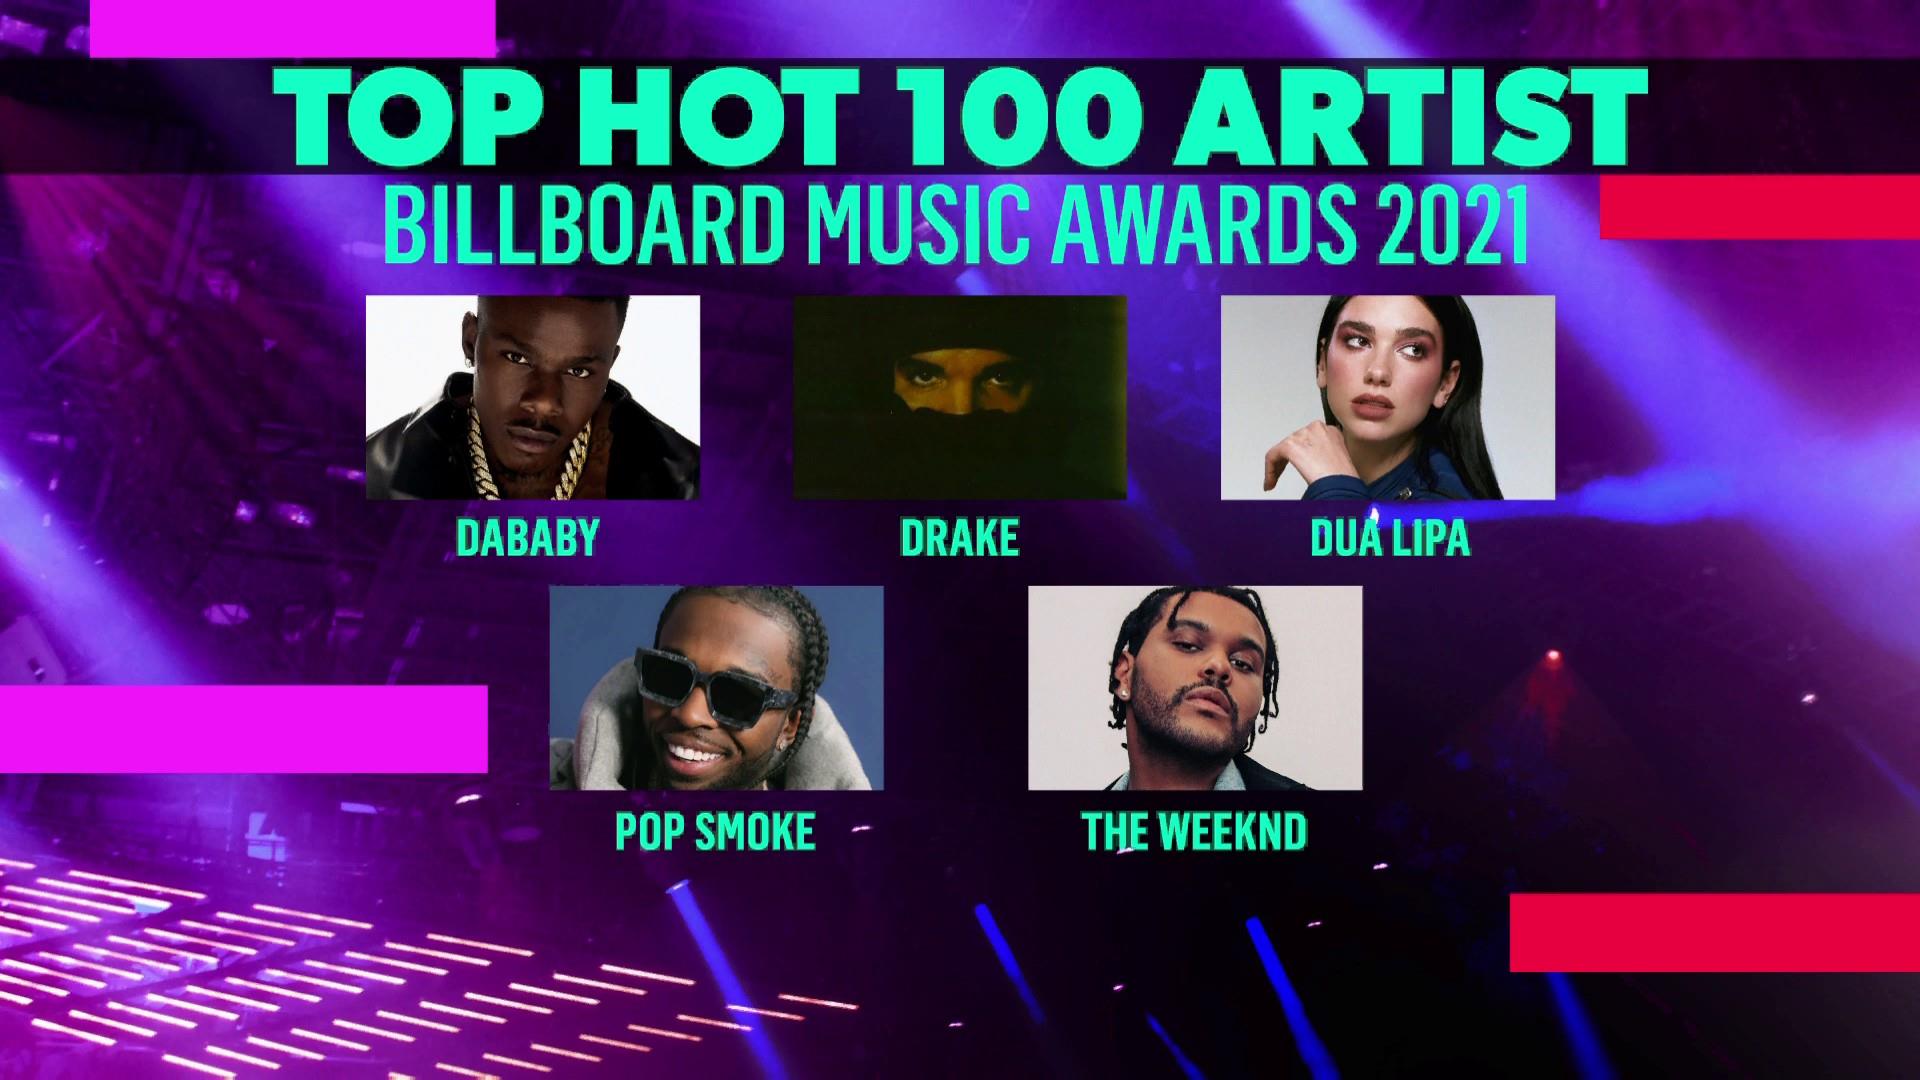 Watch TODAY Highlight Finalists for Billboard Music Awards Top 100